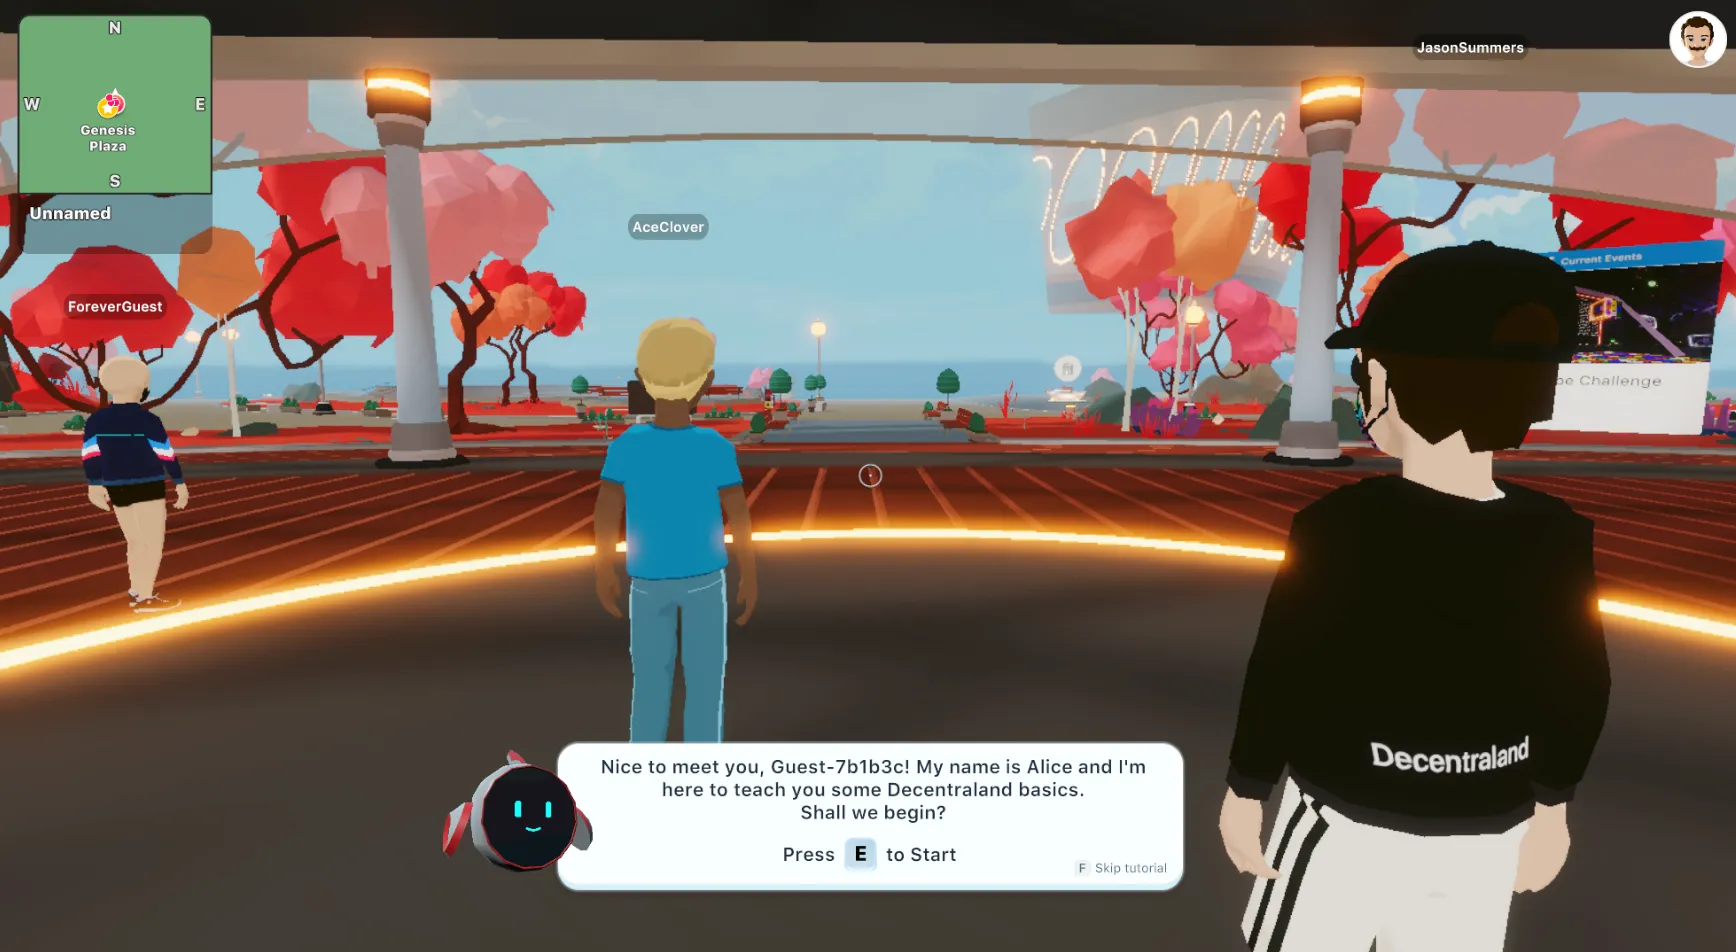 Roblox meets the revolution: Take a look at this new 'Hamilton' video game